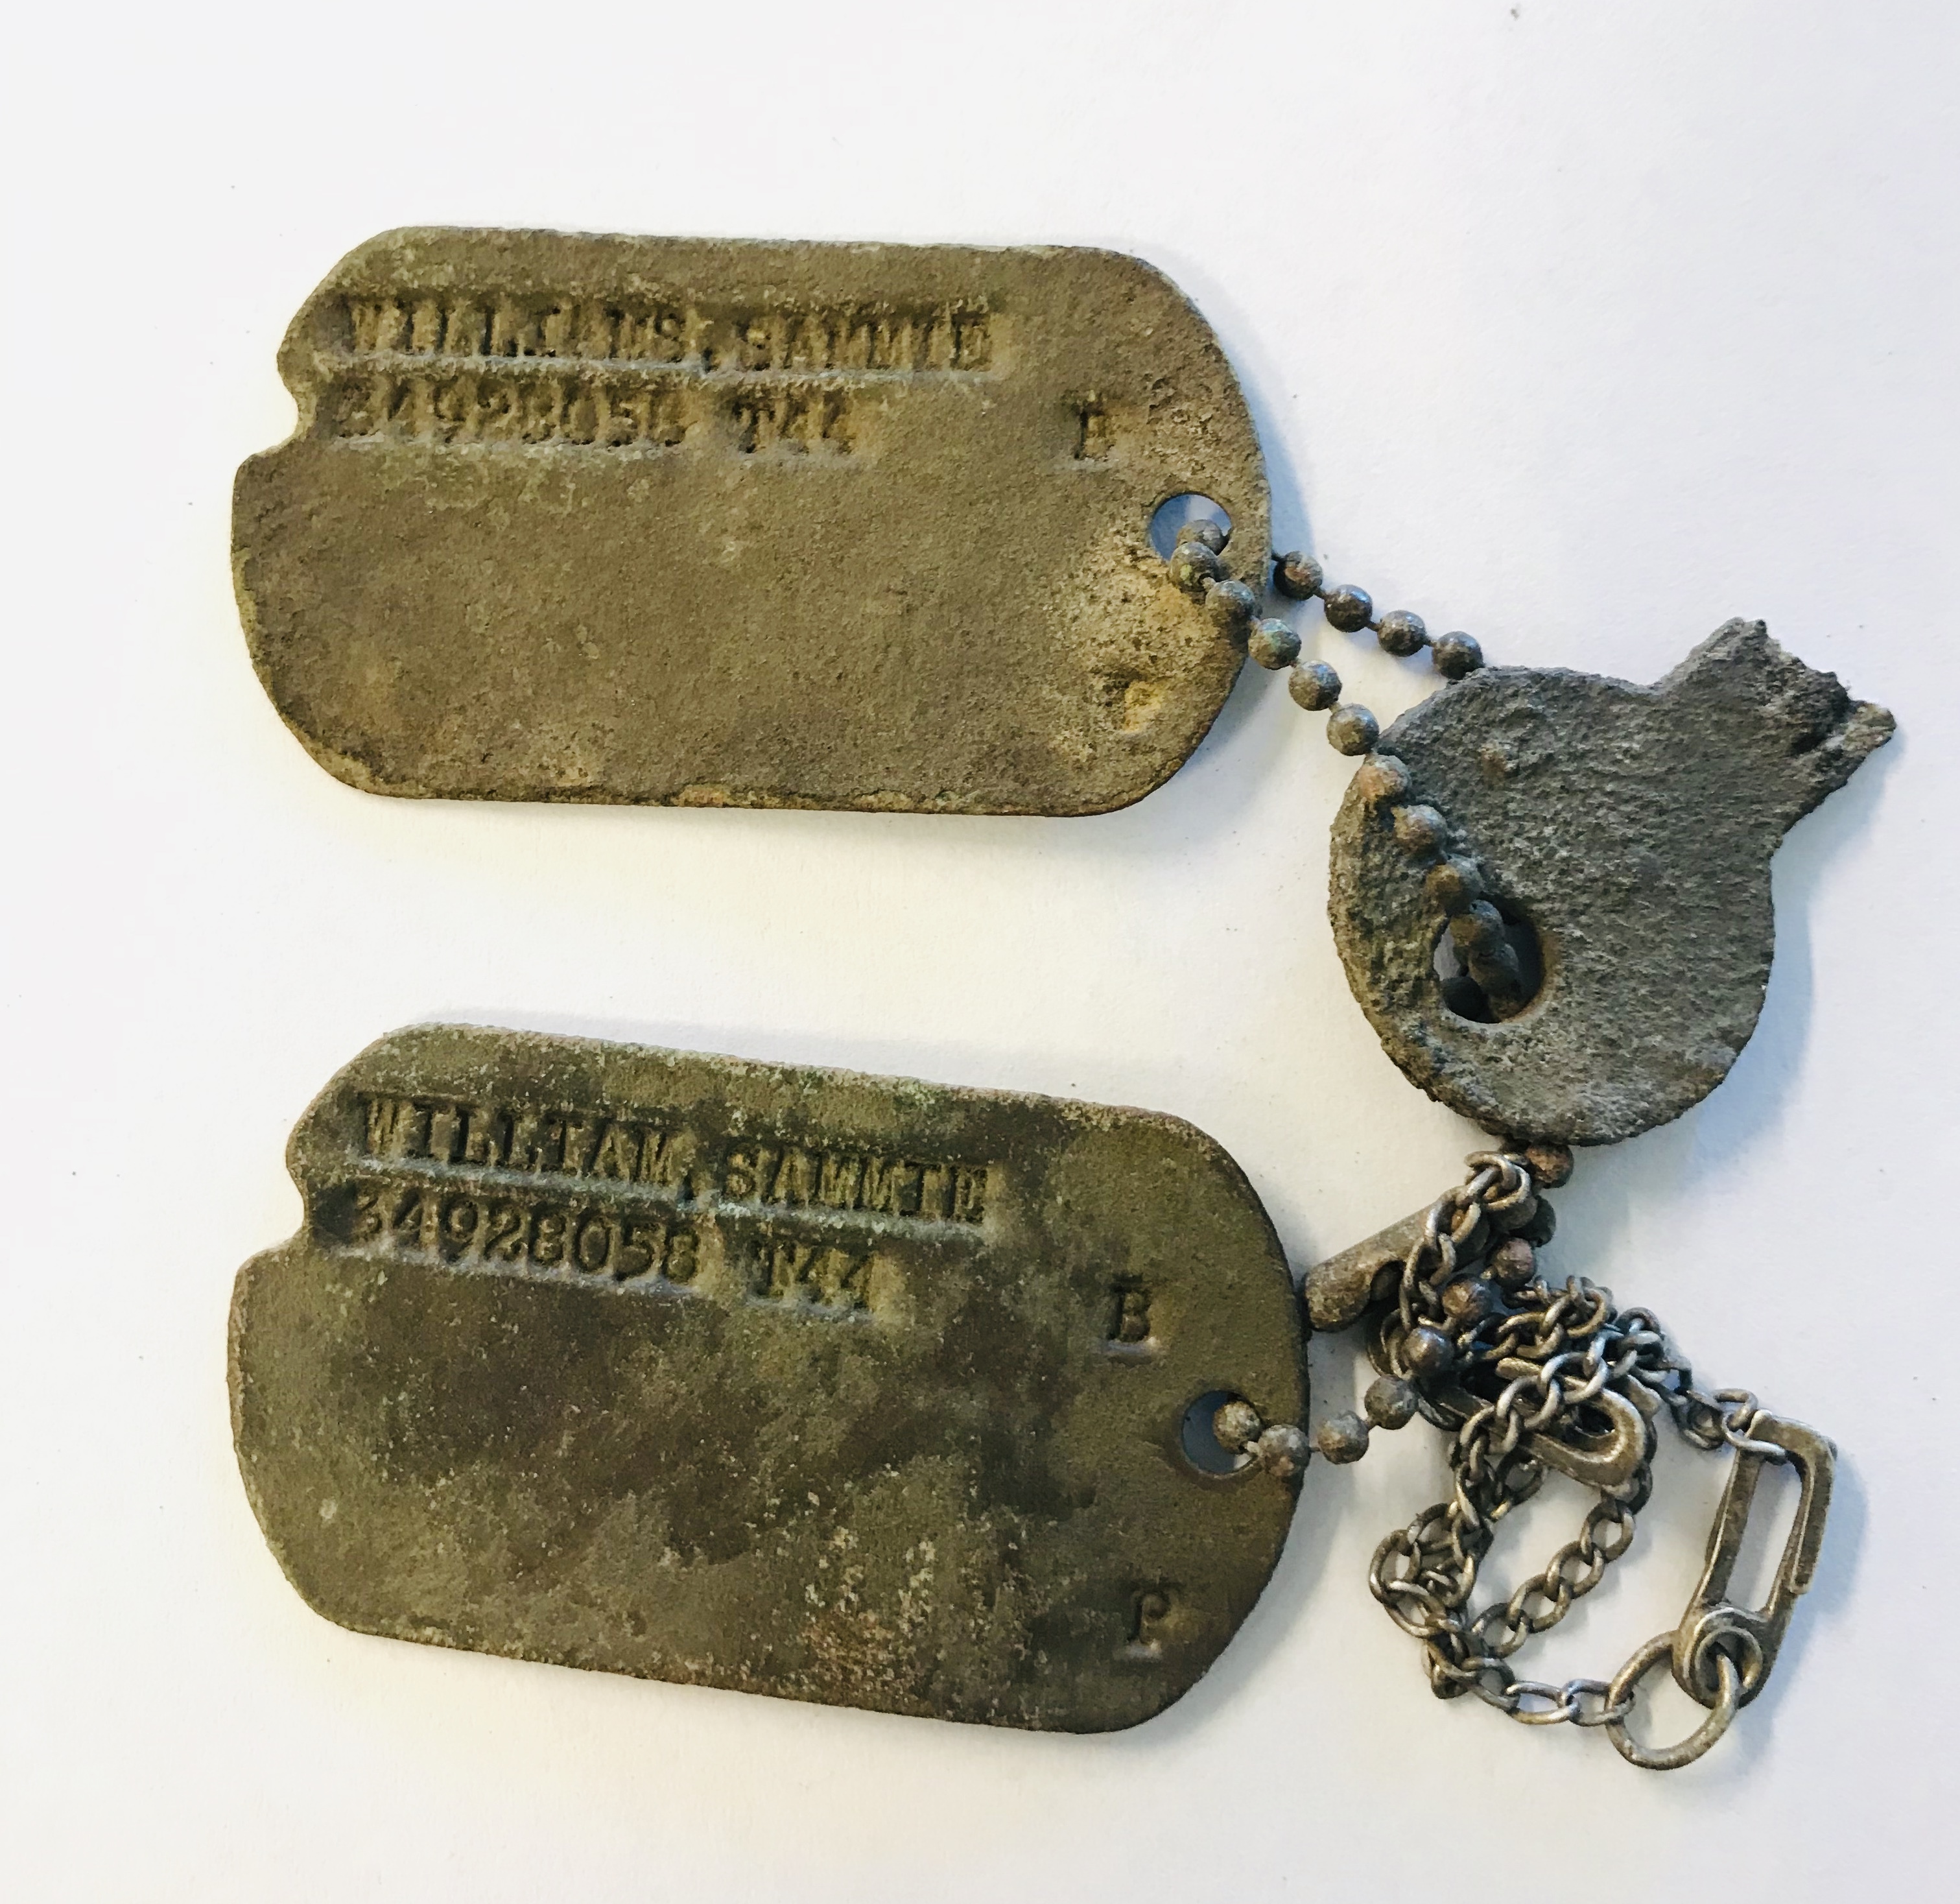 The Origin Of Penn State's Defensive Linemen's Dog Tag Tradition